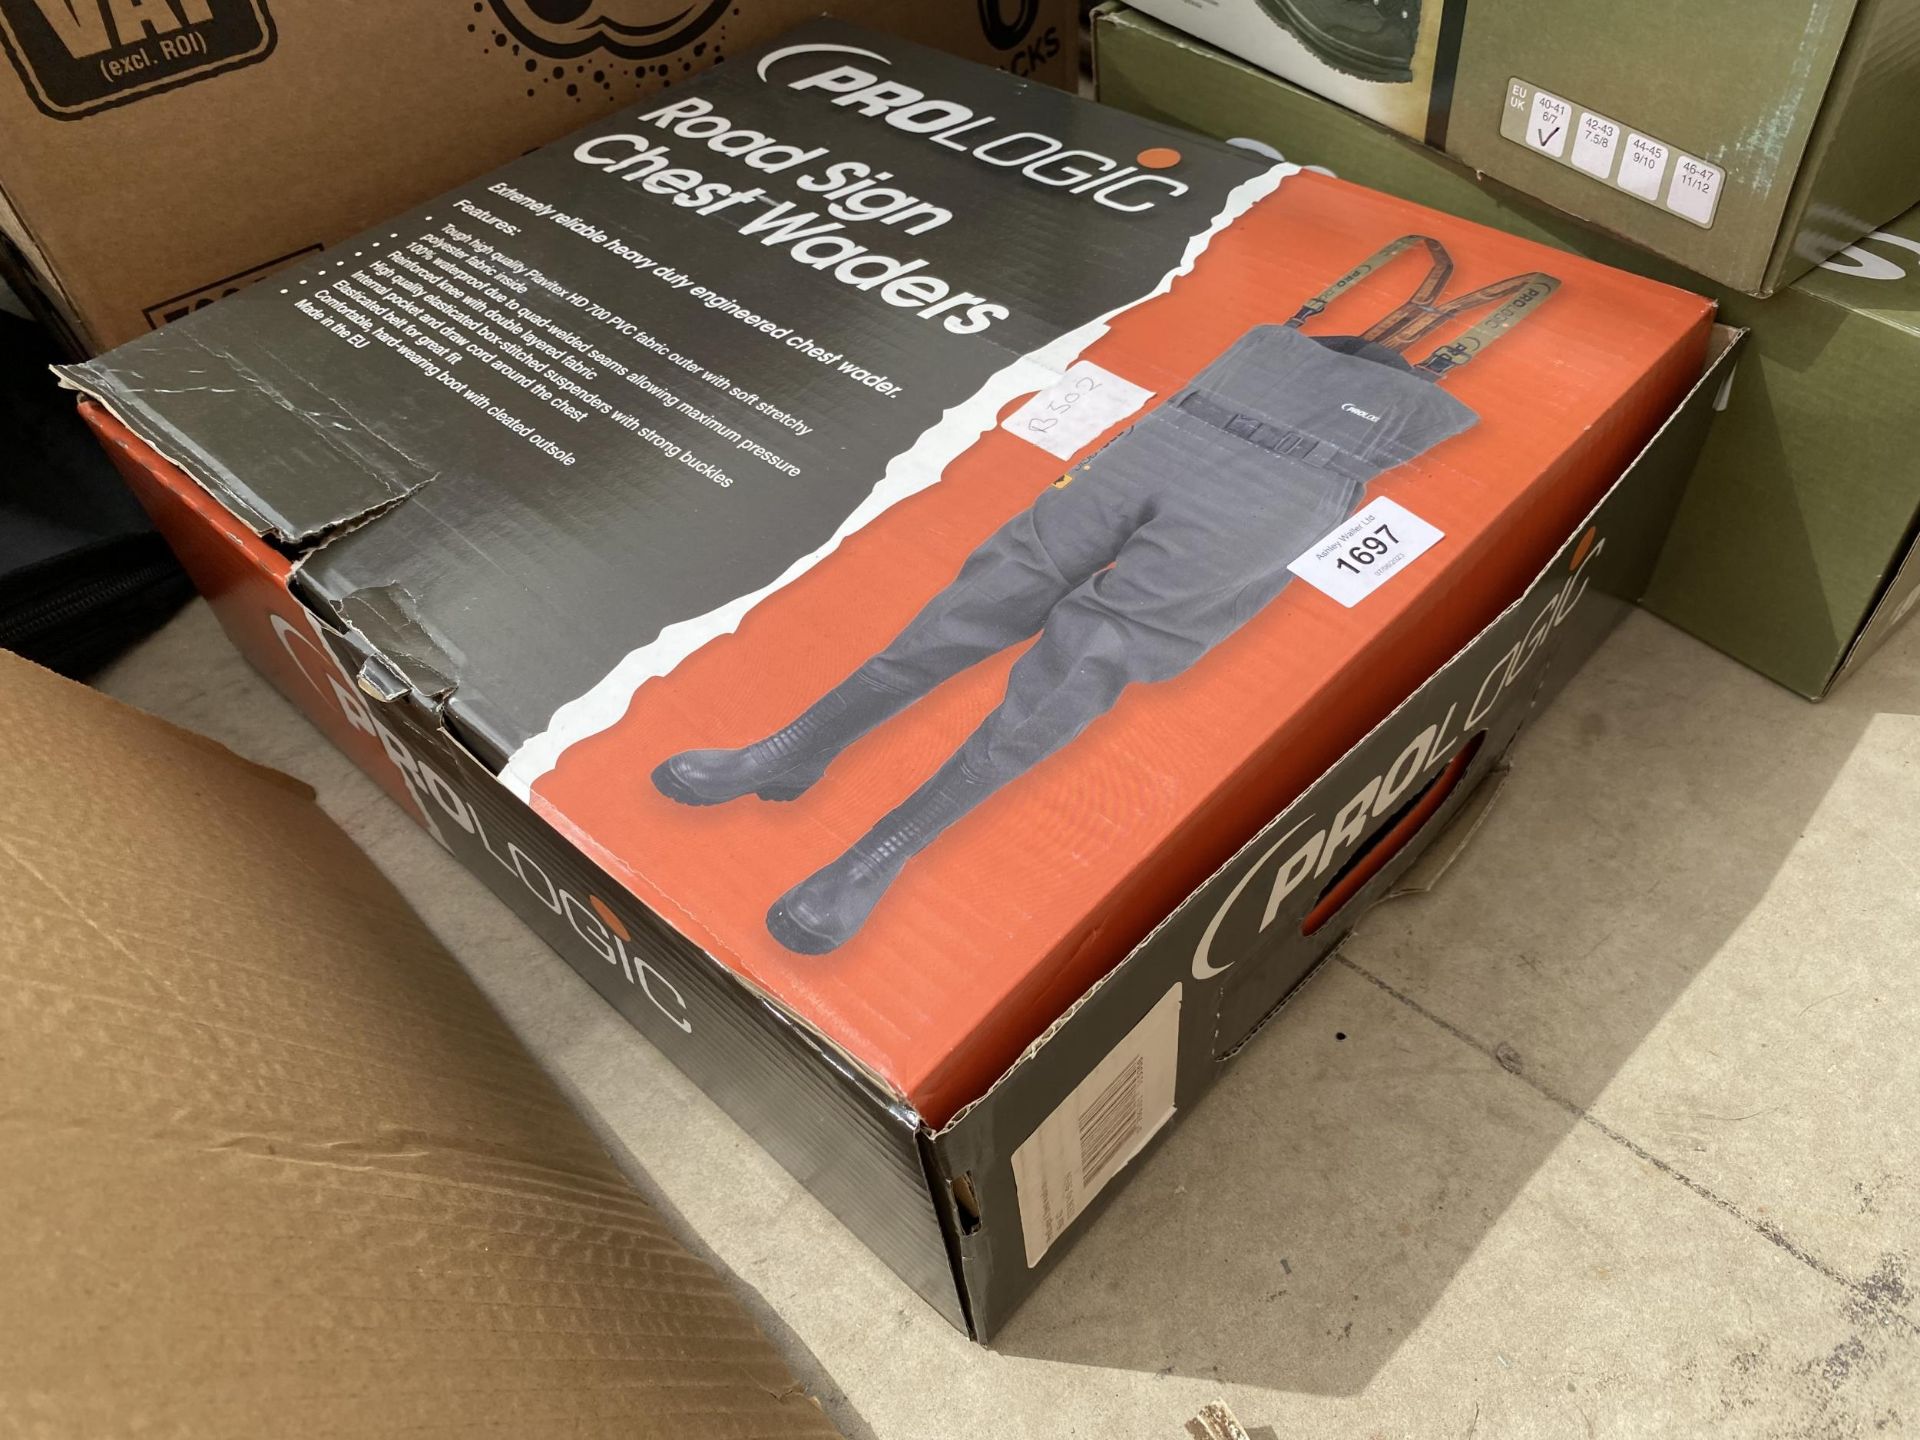 A BOXED PAIR OF PROLOGIC ROAD SIGN CHEST WADERS (FROM A TACKLE SHOP CLEARANCE)